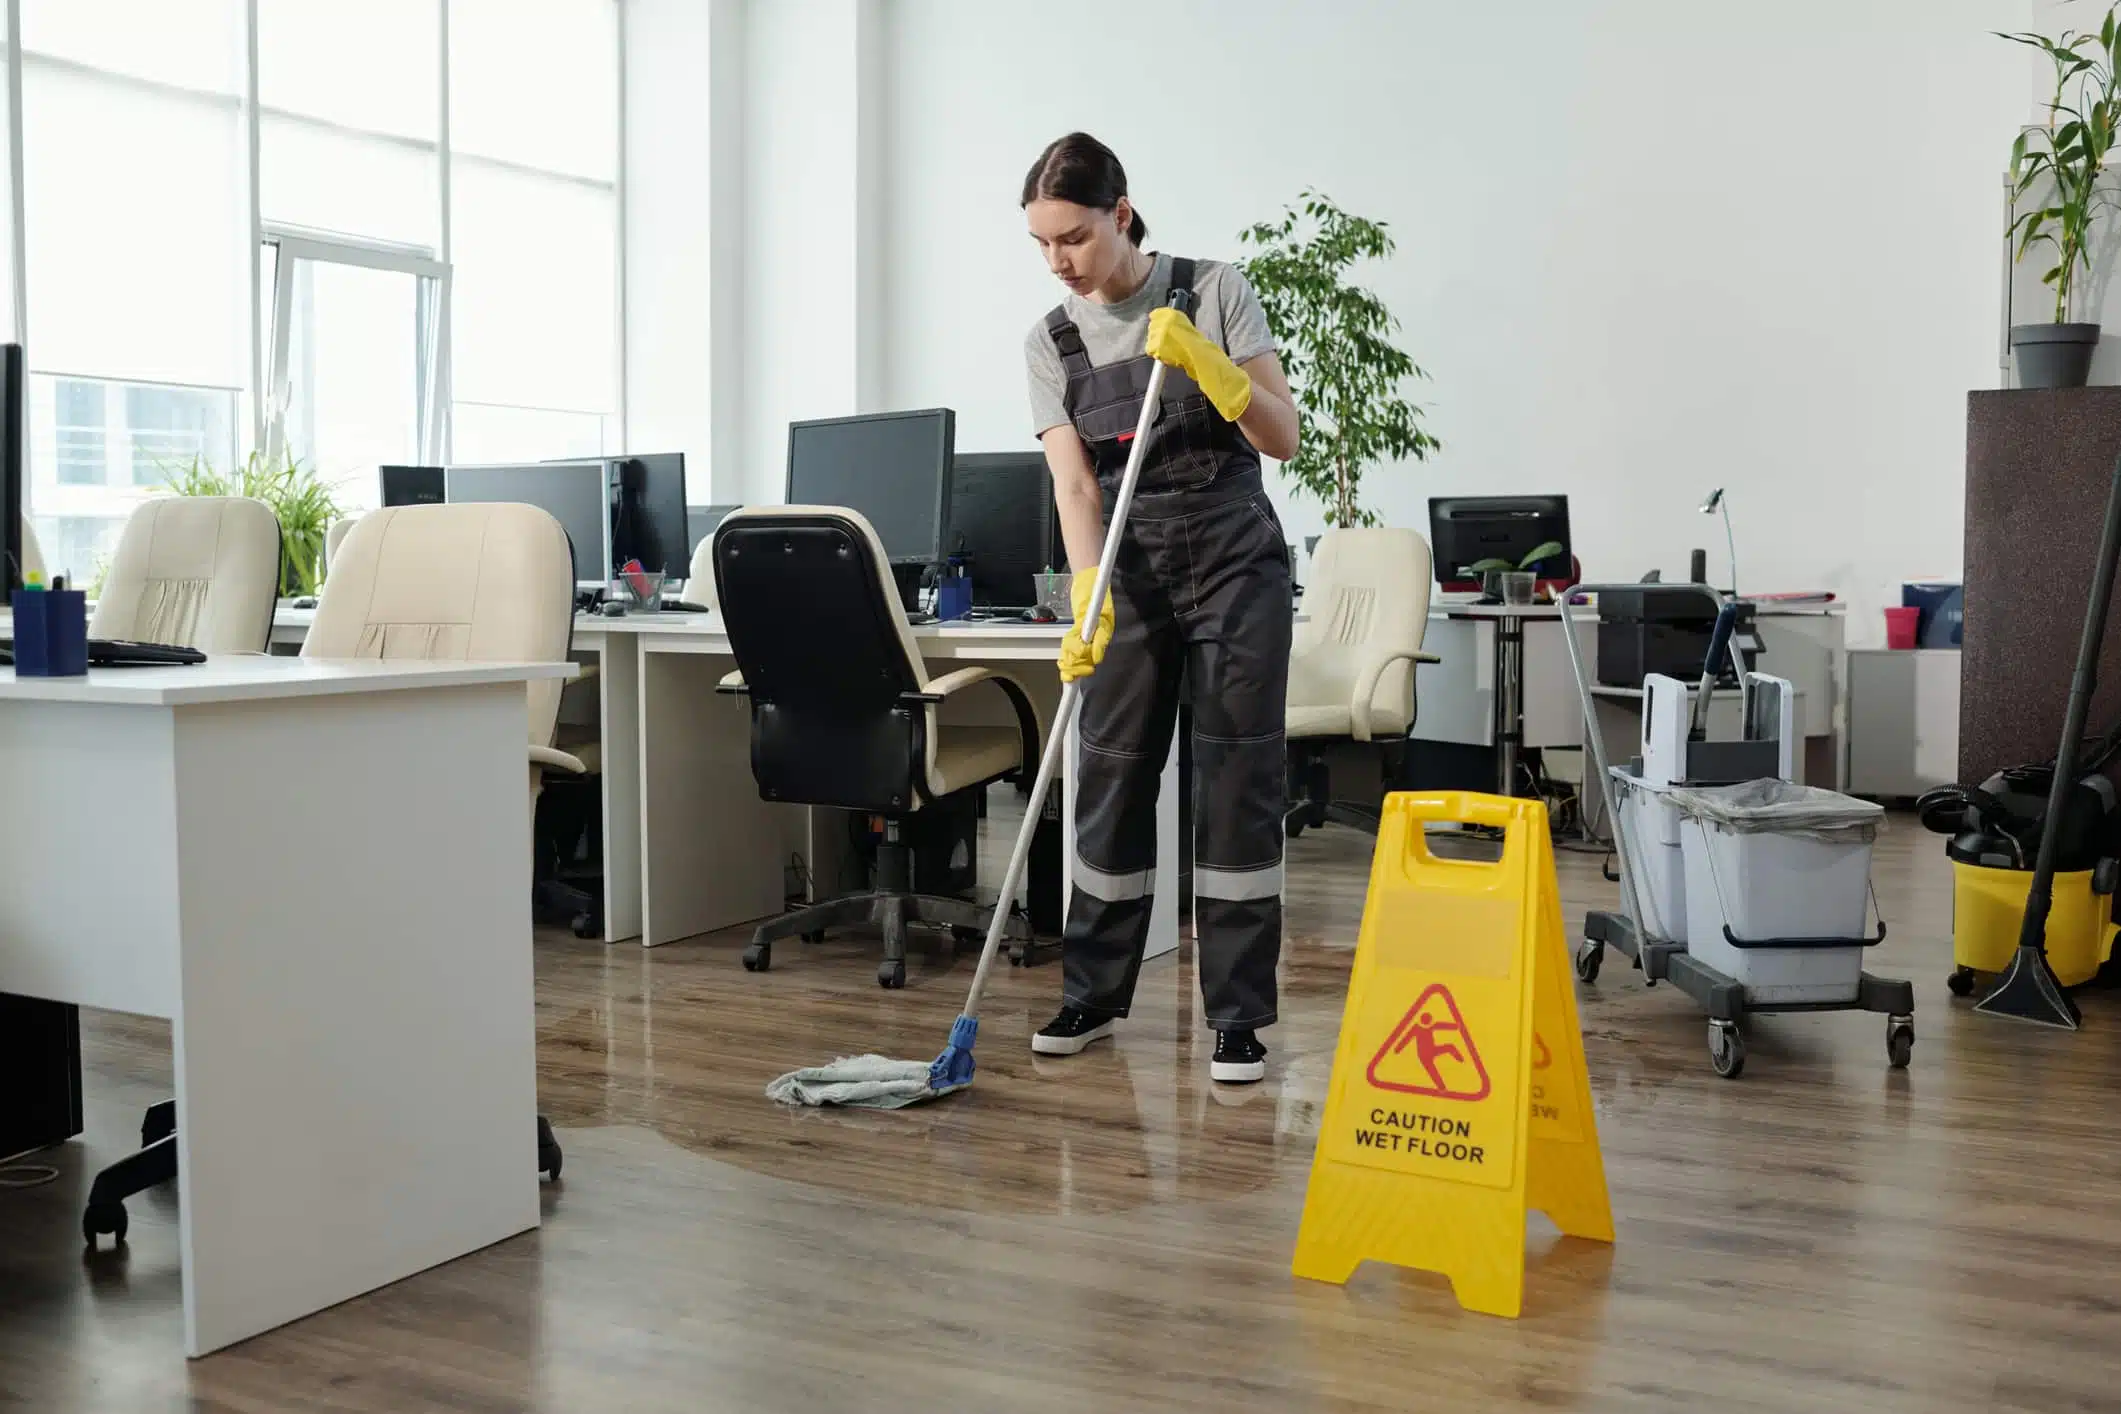 Young female cleaner in workwear using mop while cleaning floor in large modern openspace office with yellow plastic signboard in front. Article refers to non-slip coatings in teh workplace